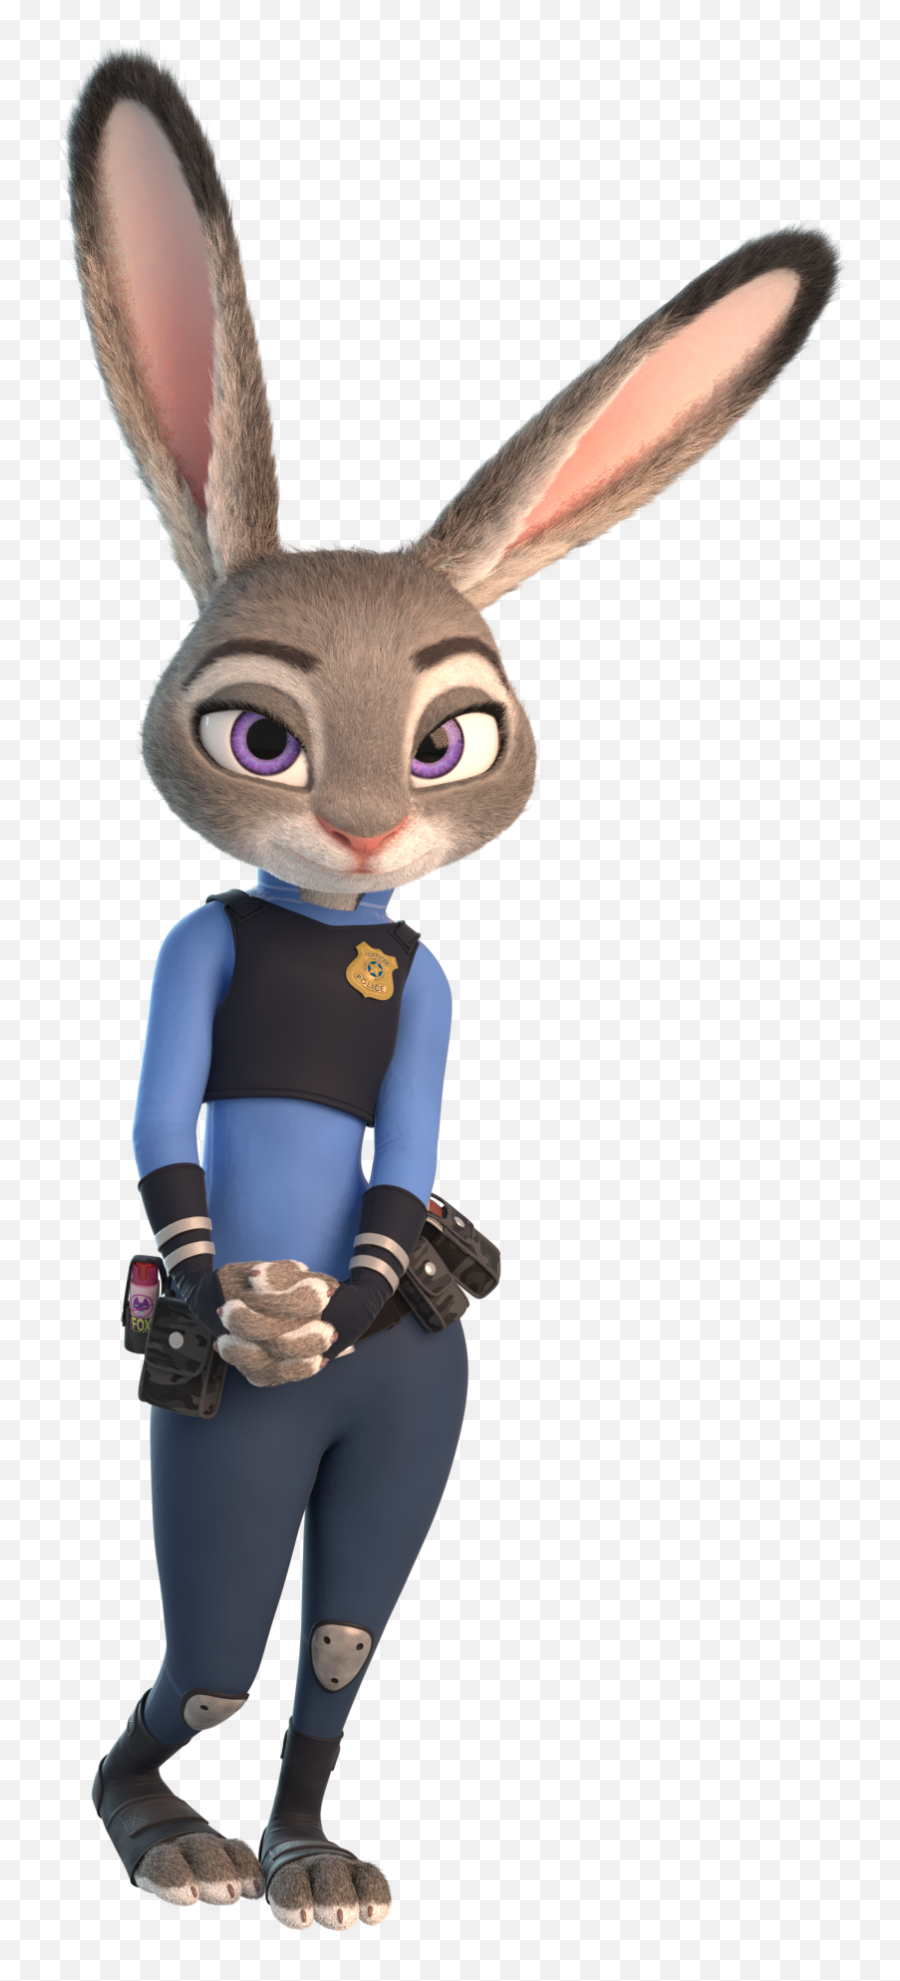 Download Bunny From Zootopia Png - Thicc Zootopia Judy Hopps,Zootopia Png